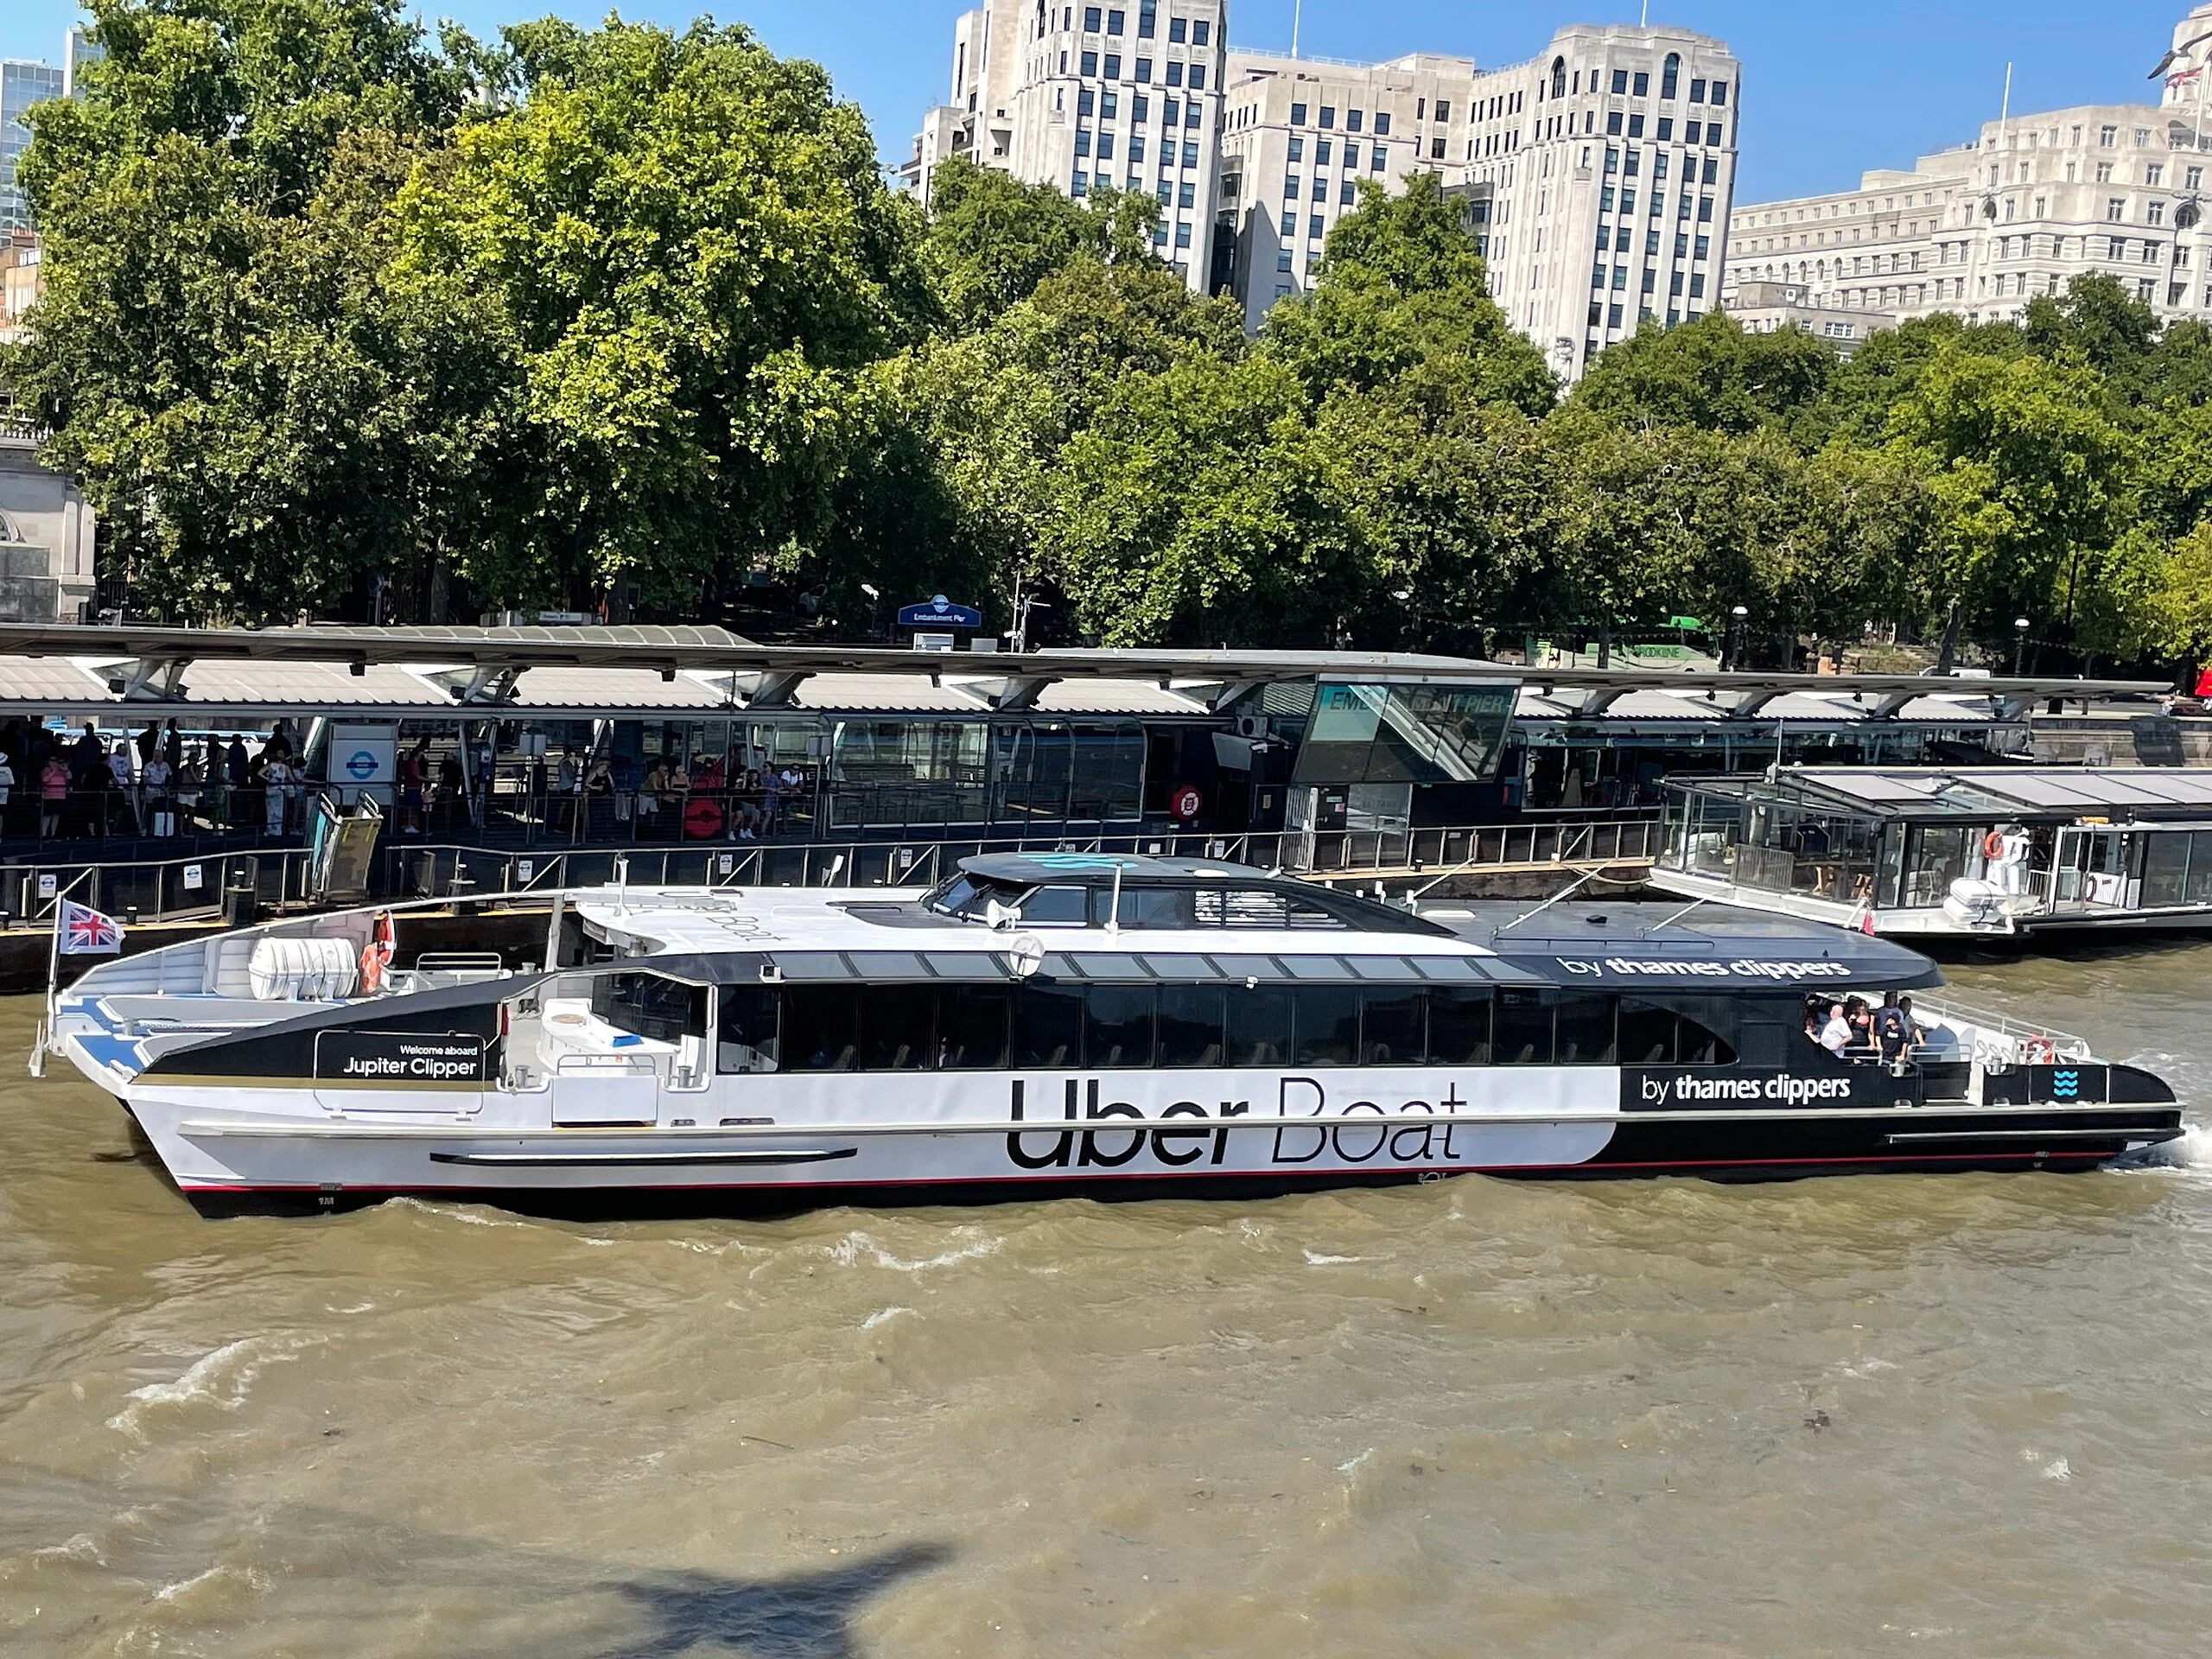 Picture of an Uber boat, part of the new British Airways offer for London City Airport